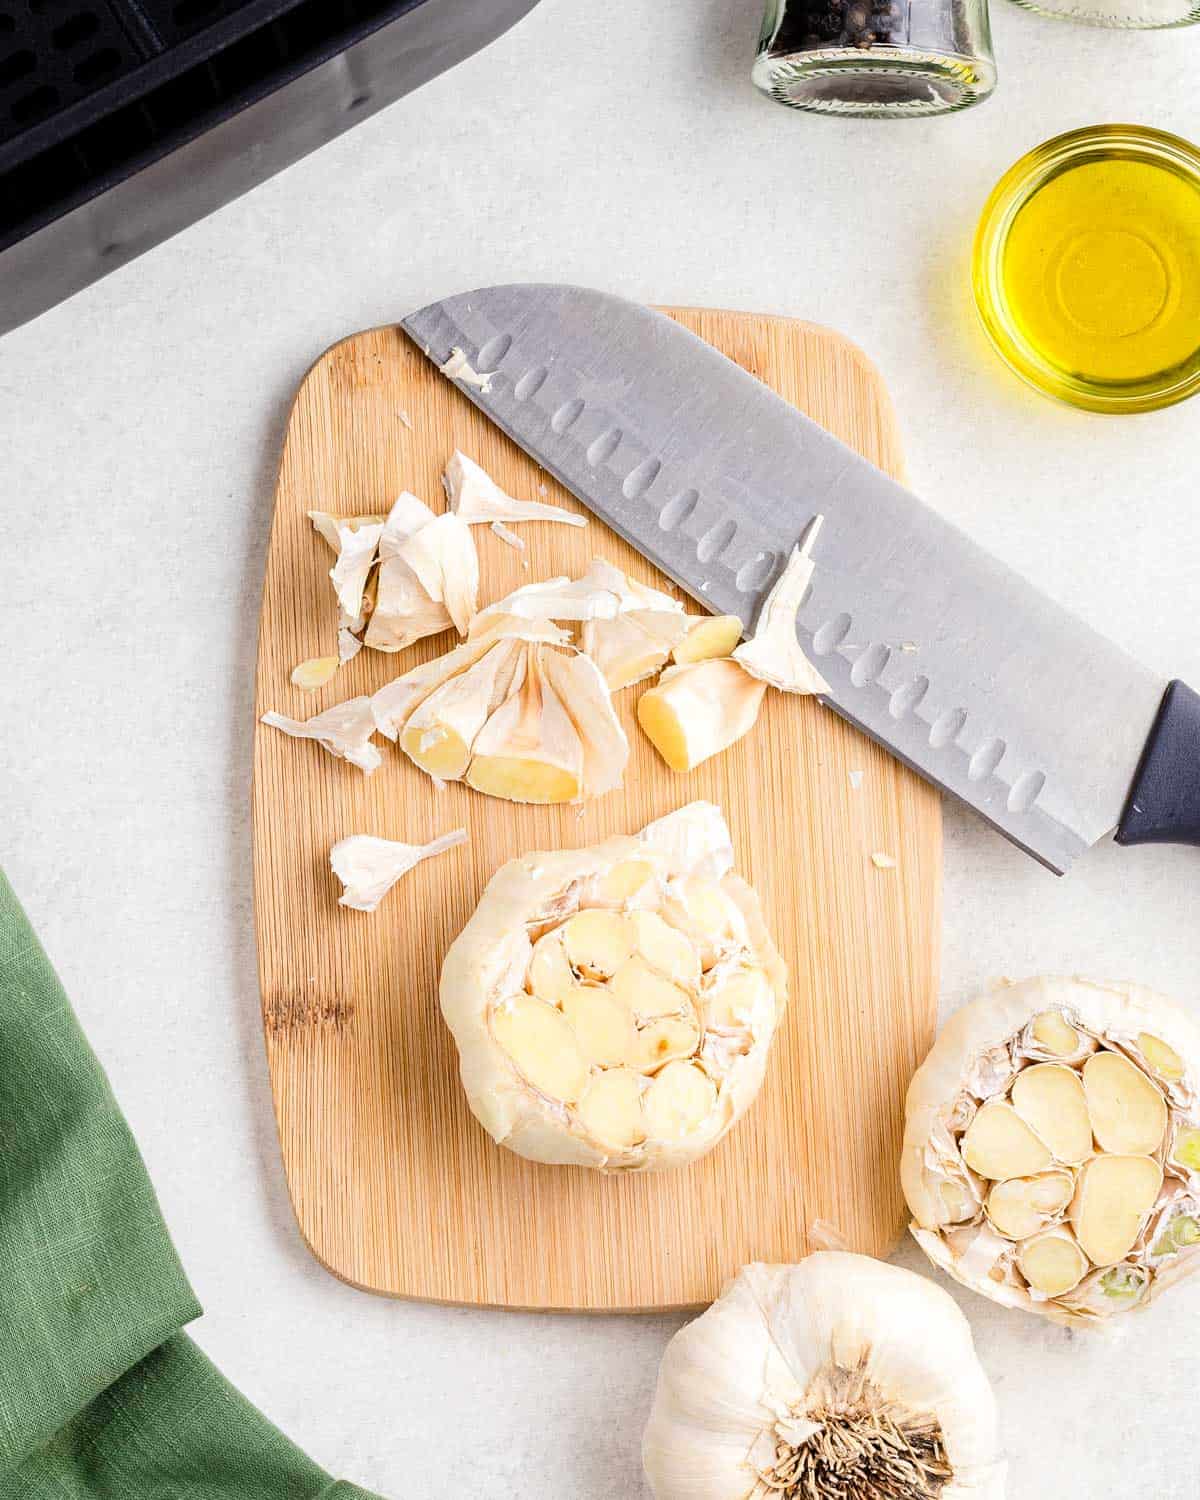 Head of garlic with the top sliced off on a cutting board with a chef's knife.